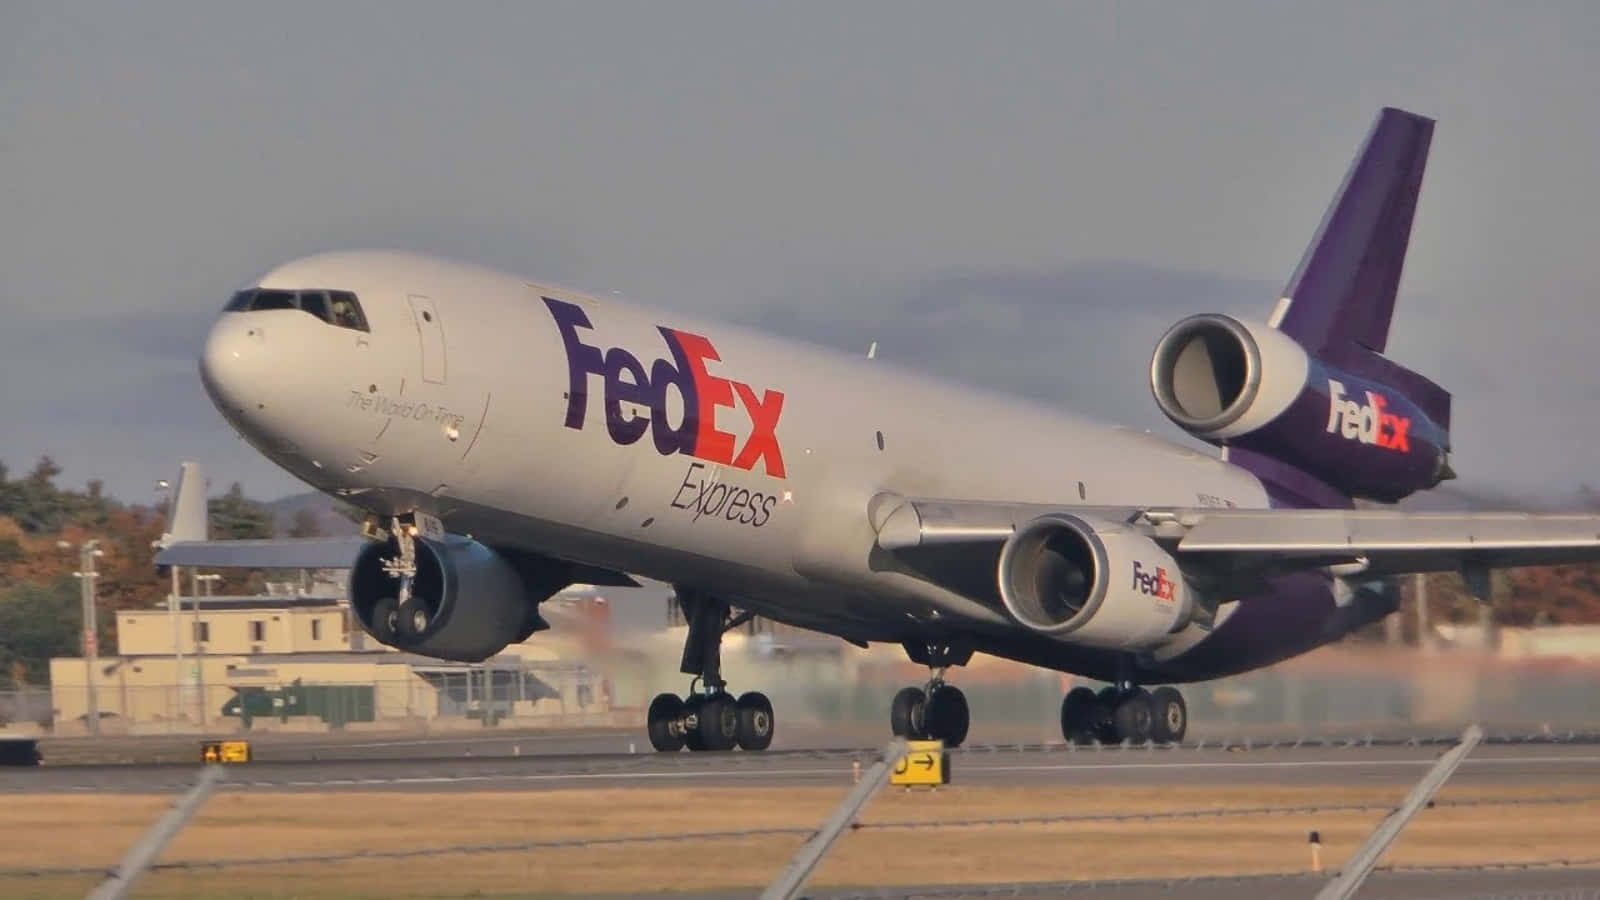 Delivering the reliability and trust of FedEx around the world.